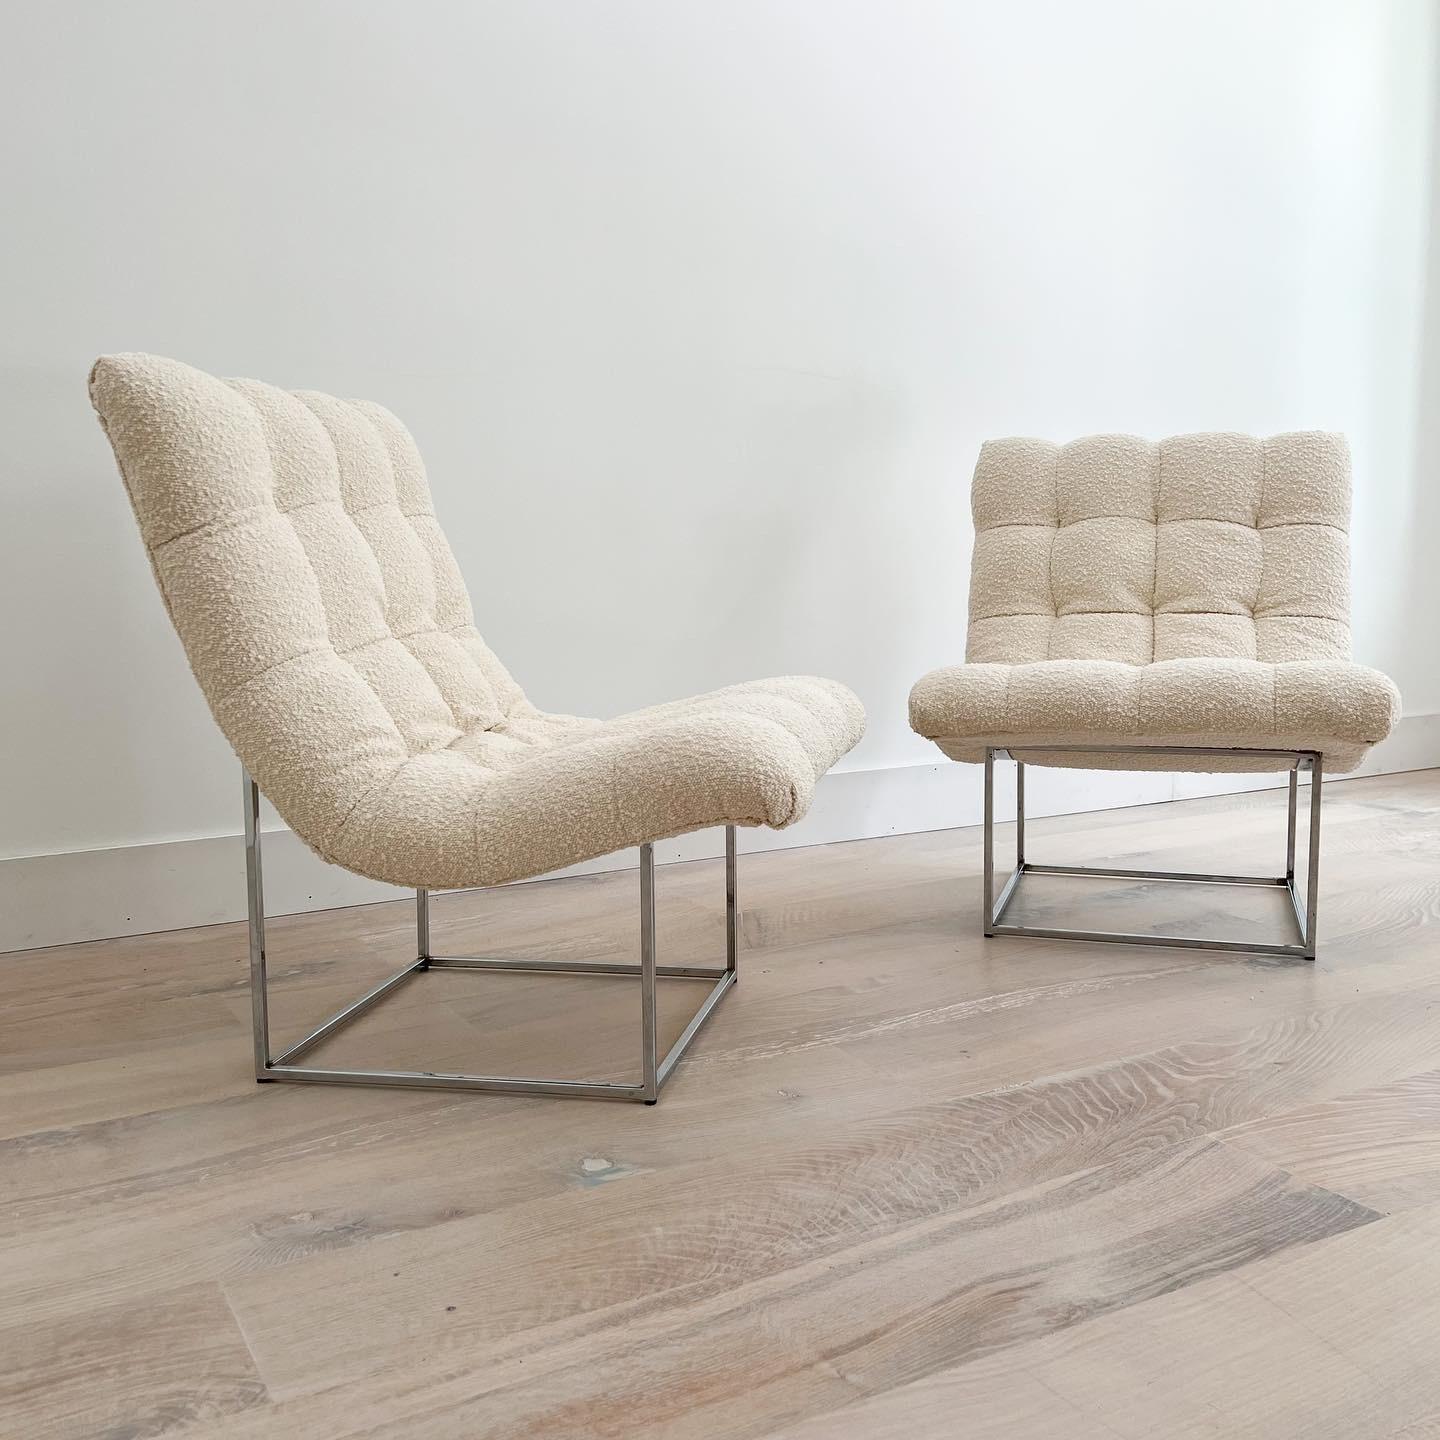 Pair of Mid-Century Modern scoop chairs on thin chrome bases by Milo Baughman for Thayer Coggin. New foam and cream boucle tufted upholstery set these chairs off nicely! The chrome is in great condition with minimal wear.